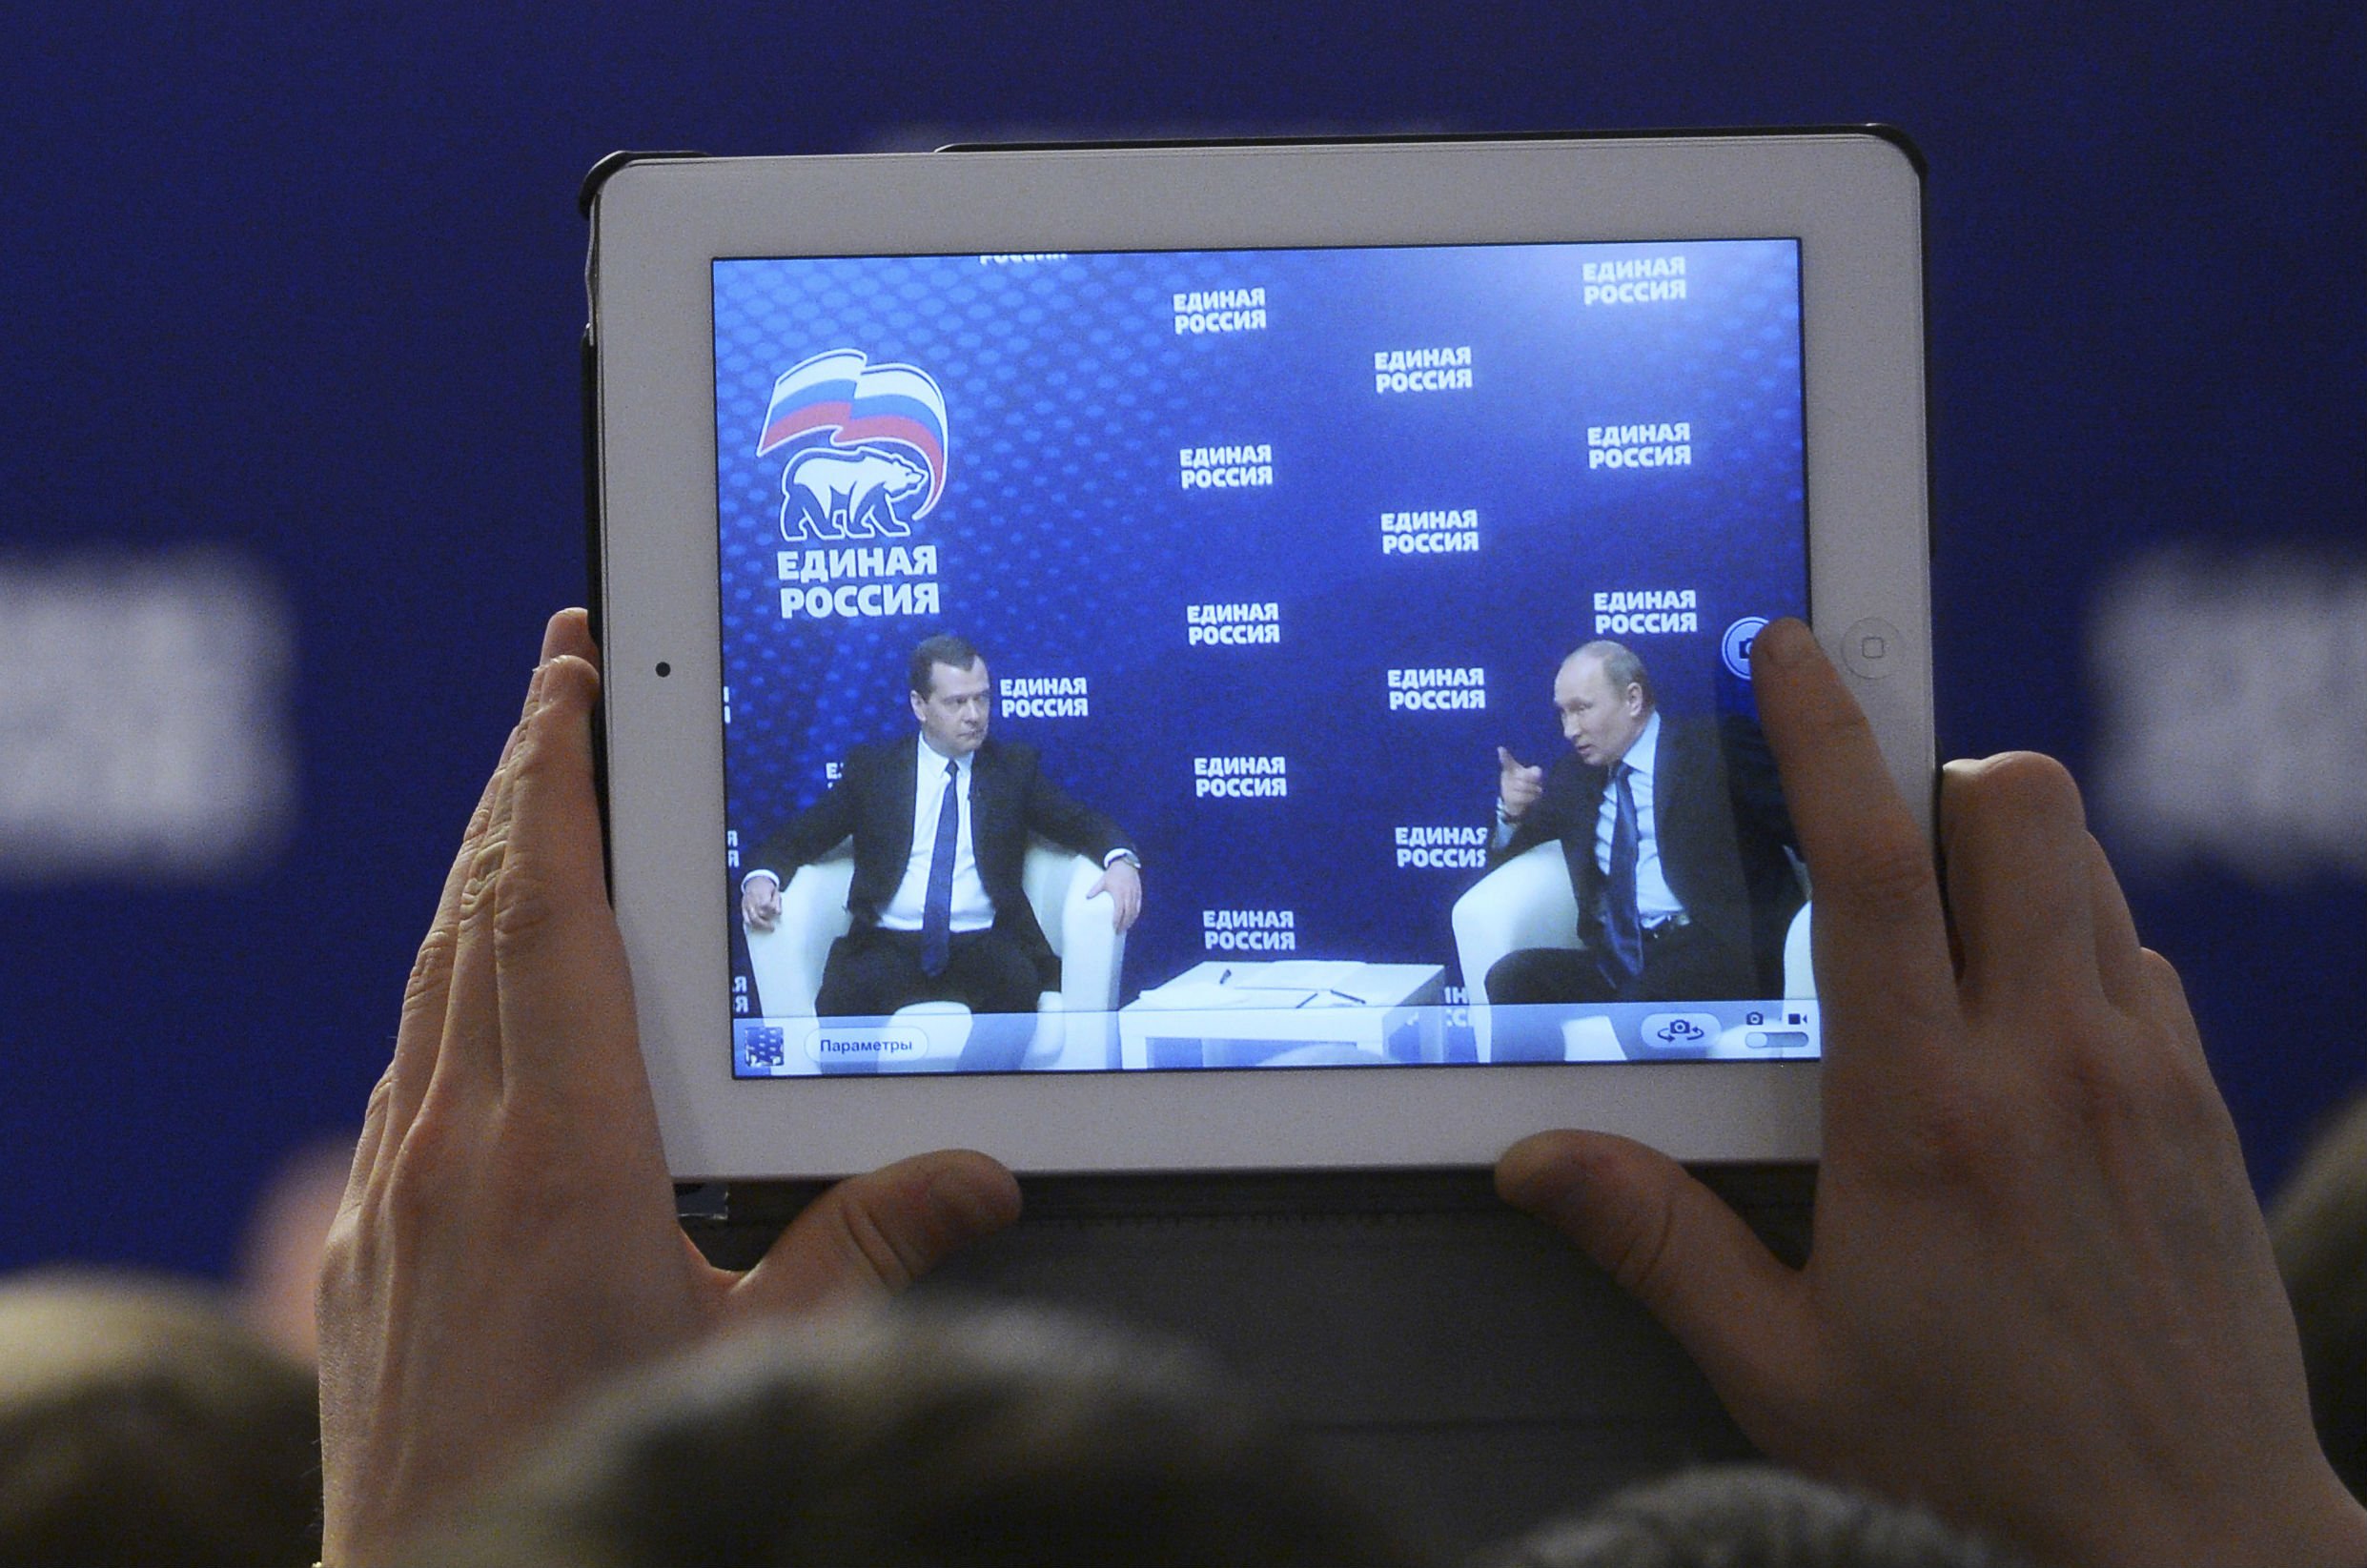 Russia's President Vladimir Putin (R) and Prime Minister Dmitry Medvedev are seen on a screen of a tablet computer during a meeting with members and activists of the United Russia political party in Moscow region, October 3, 2013. Credit: REUTERS/Alexander Astafyev/RIA Novosti/Pool 